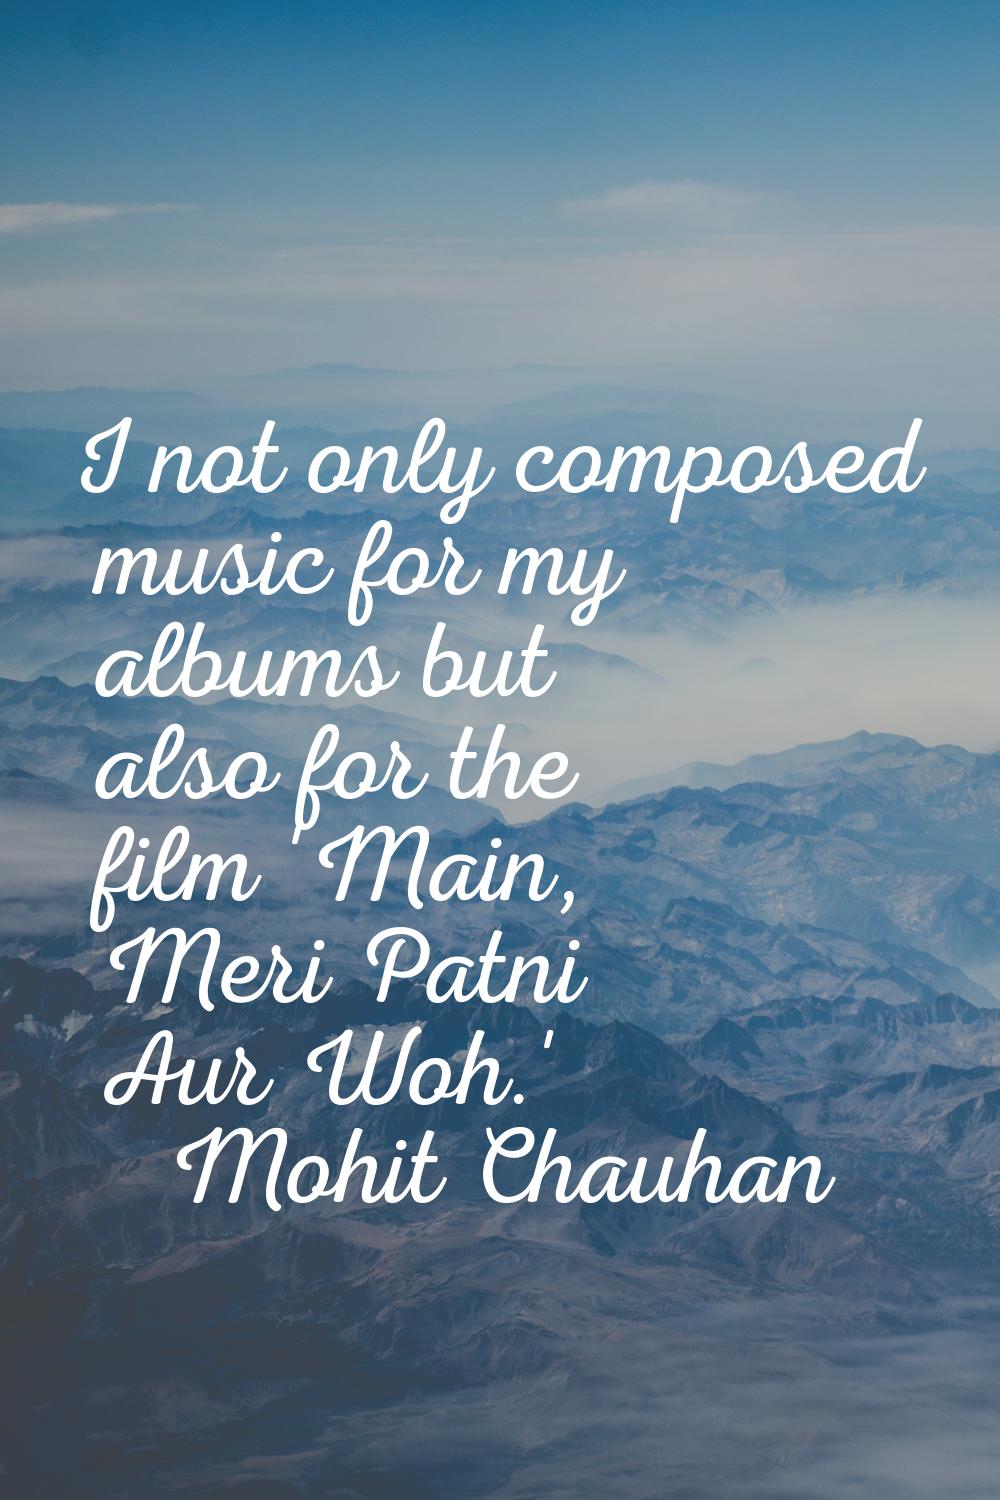 I not only composed music for my albums but also for the film 'Main, Meri Patni Aur Woh.'